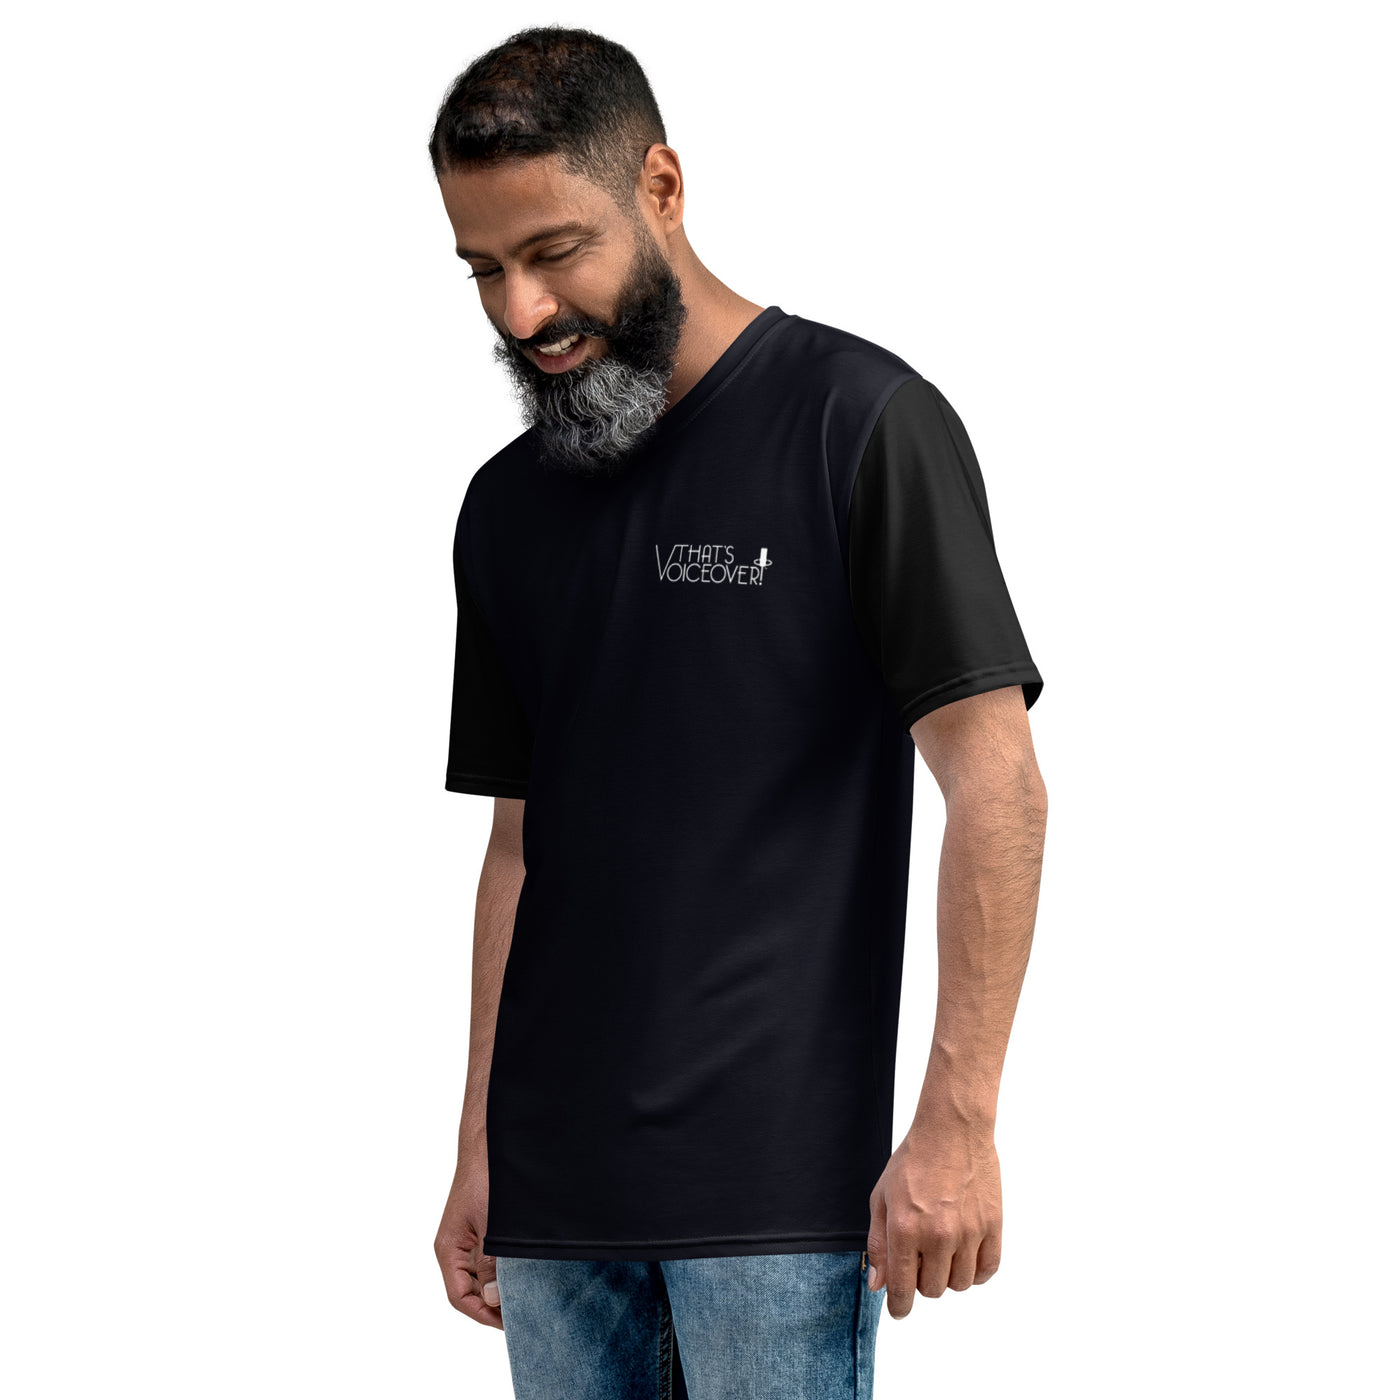 That's Voiceover! Black Male t-shirt